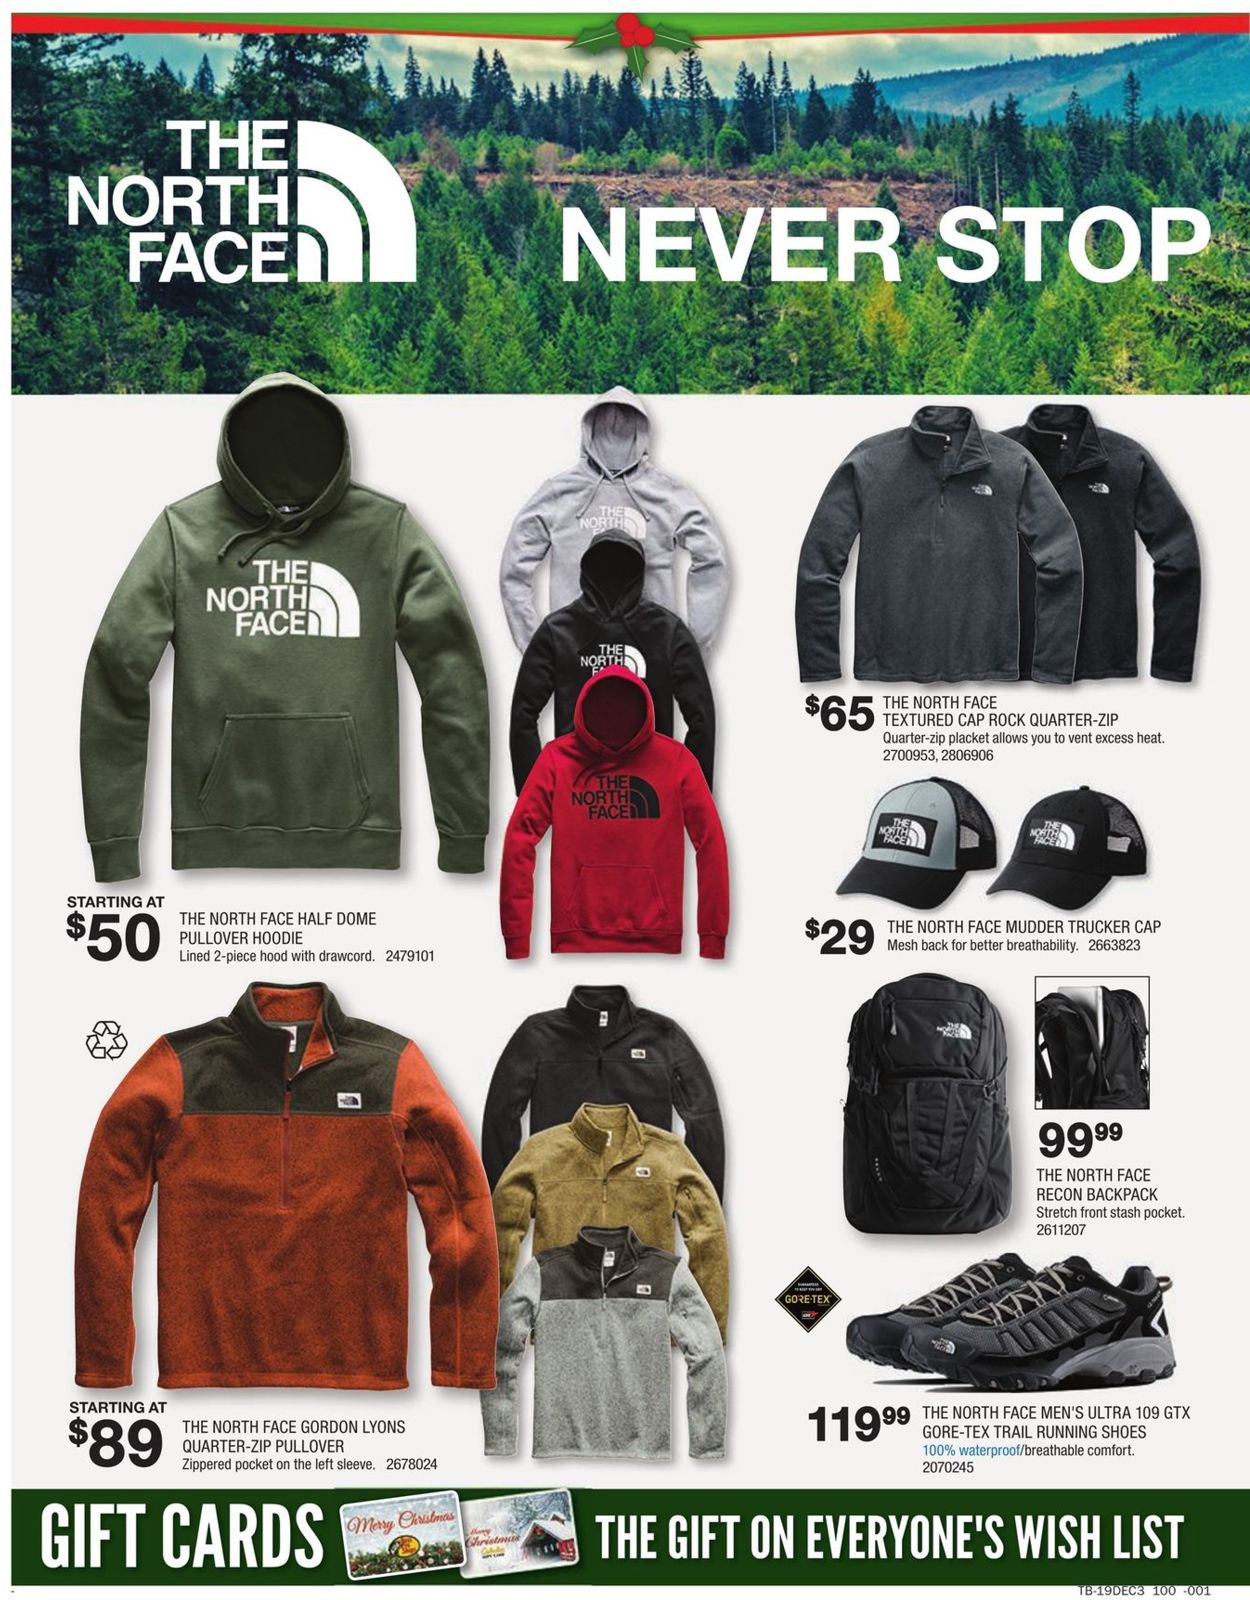 Catalogue Cabela's - Christmas Sale Ad 2019 from 12/15/2019